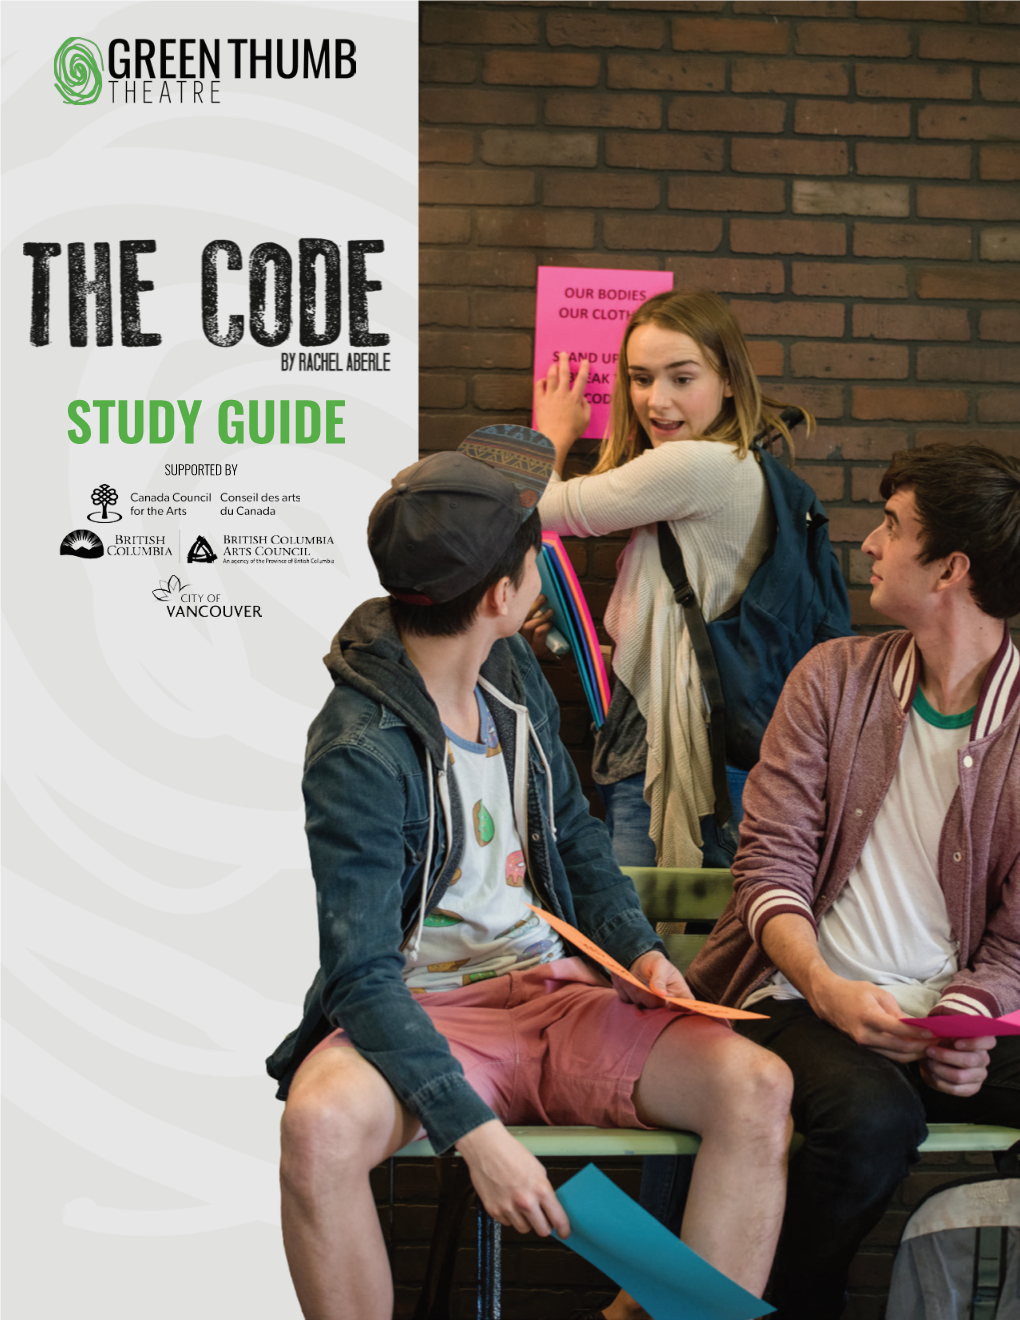 Study Guide Supported by the Code